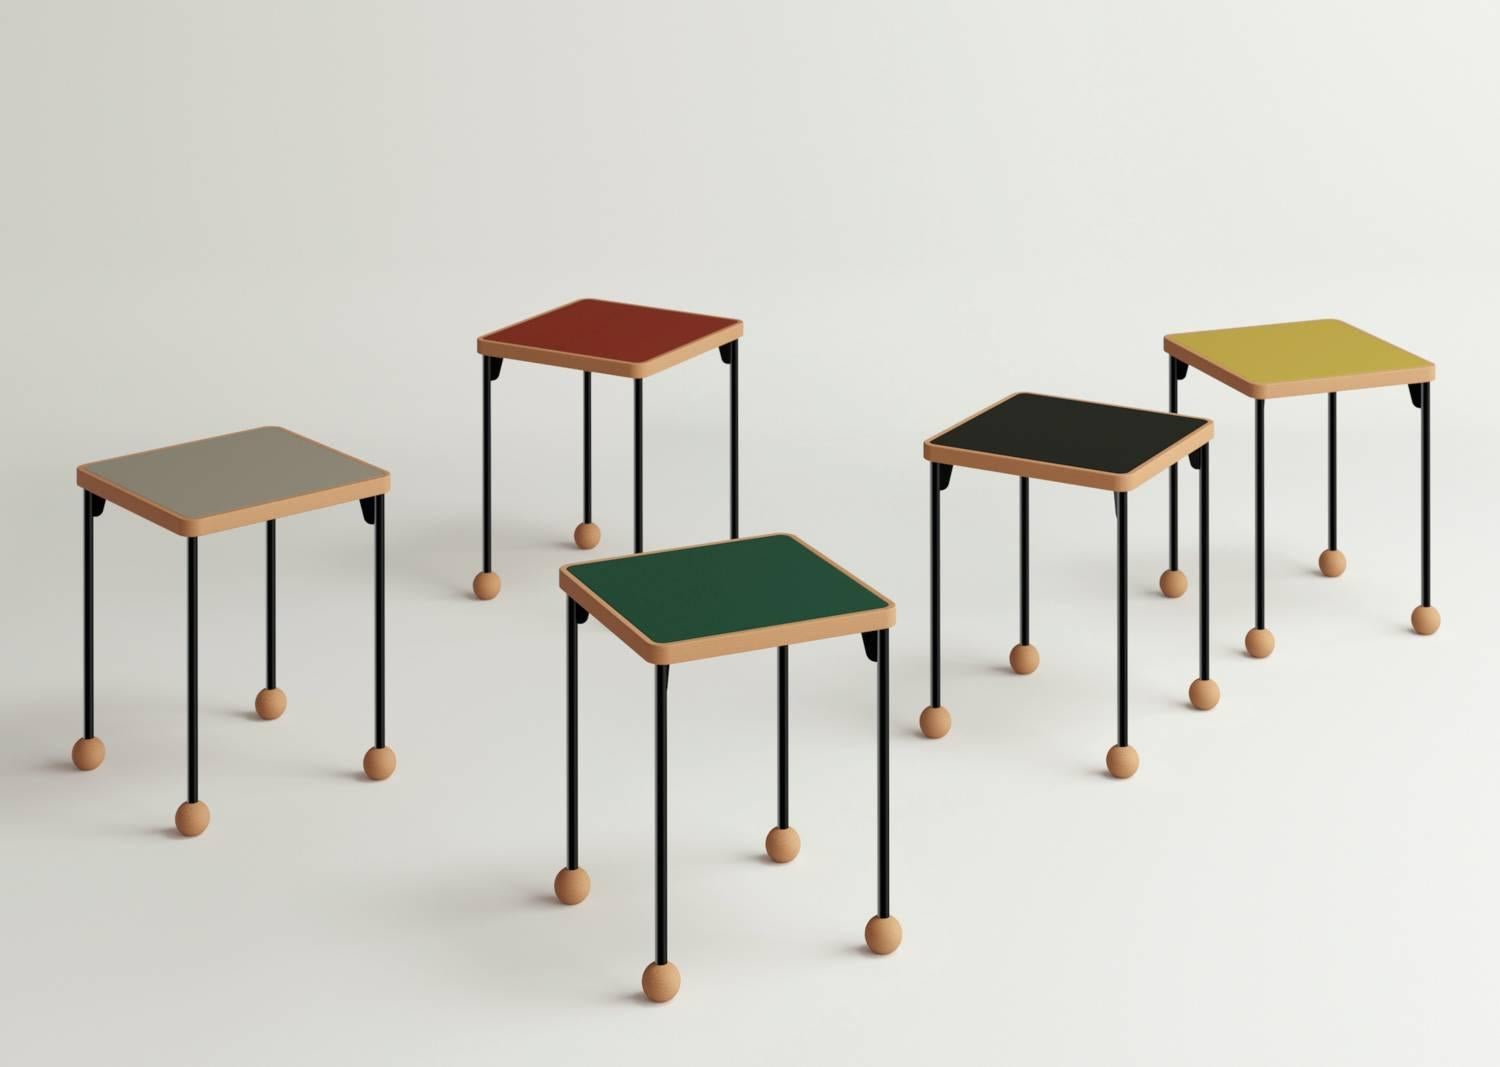 Stools or side tables by Russian designer Dmitry Samygin.

Beechwood, metal and linoleum Forbo
Measures: 45.7 cm x 35.6 cm x 35.6 cm.

Available colors: black, grey, red, yellow and green.

[Sold individually]

After studying applied Arts